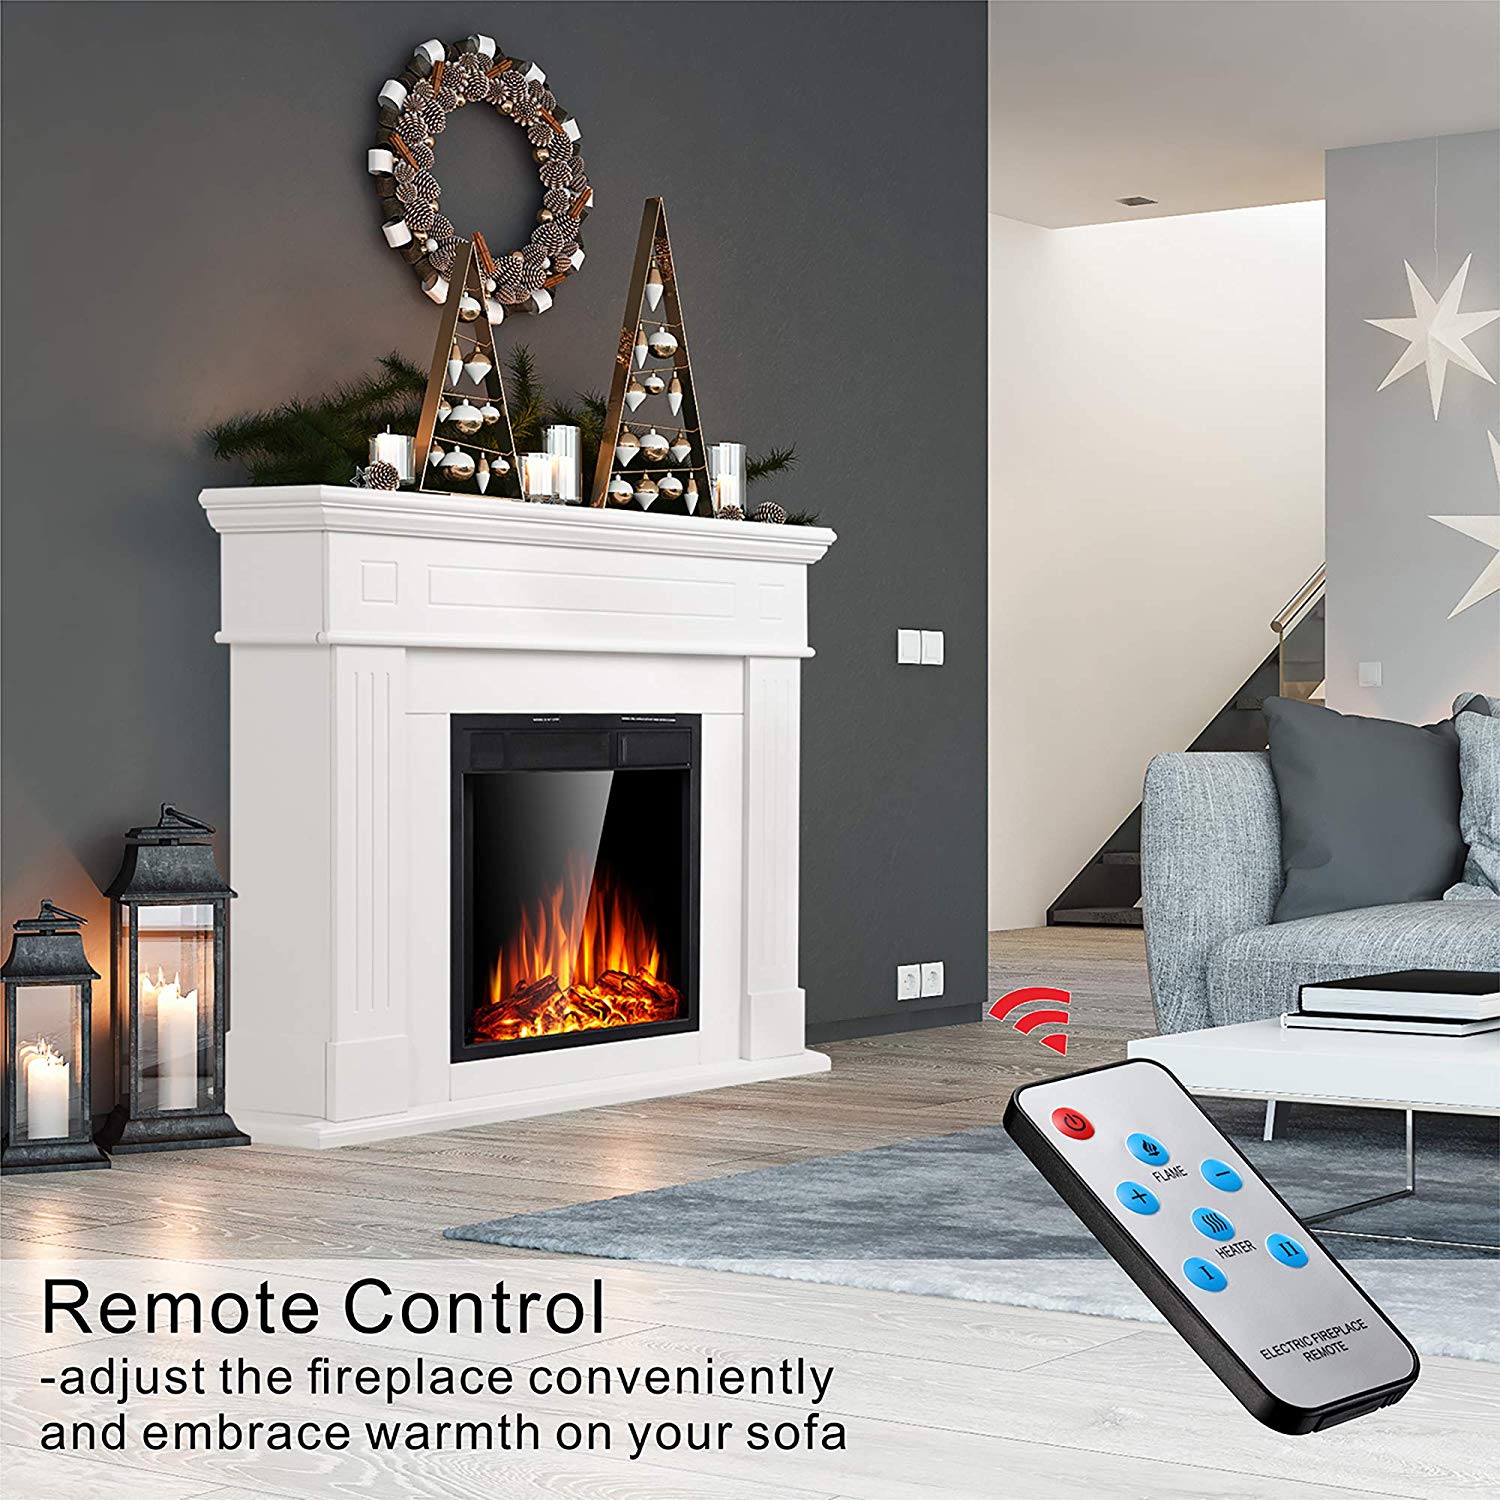 Electric Fireplace Remote Control App Inspirational Jamfly Mantel Electric Fireplace Wood Surround Firebox Freestanding Electric Fireplace Heater Tv Stand Adjustable Led Flame with Remote Control